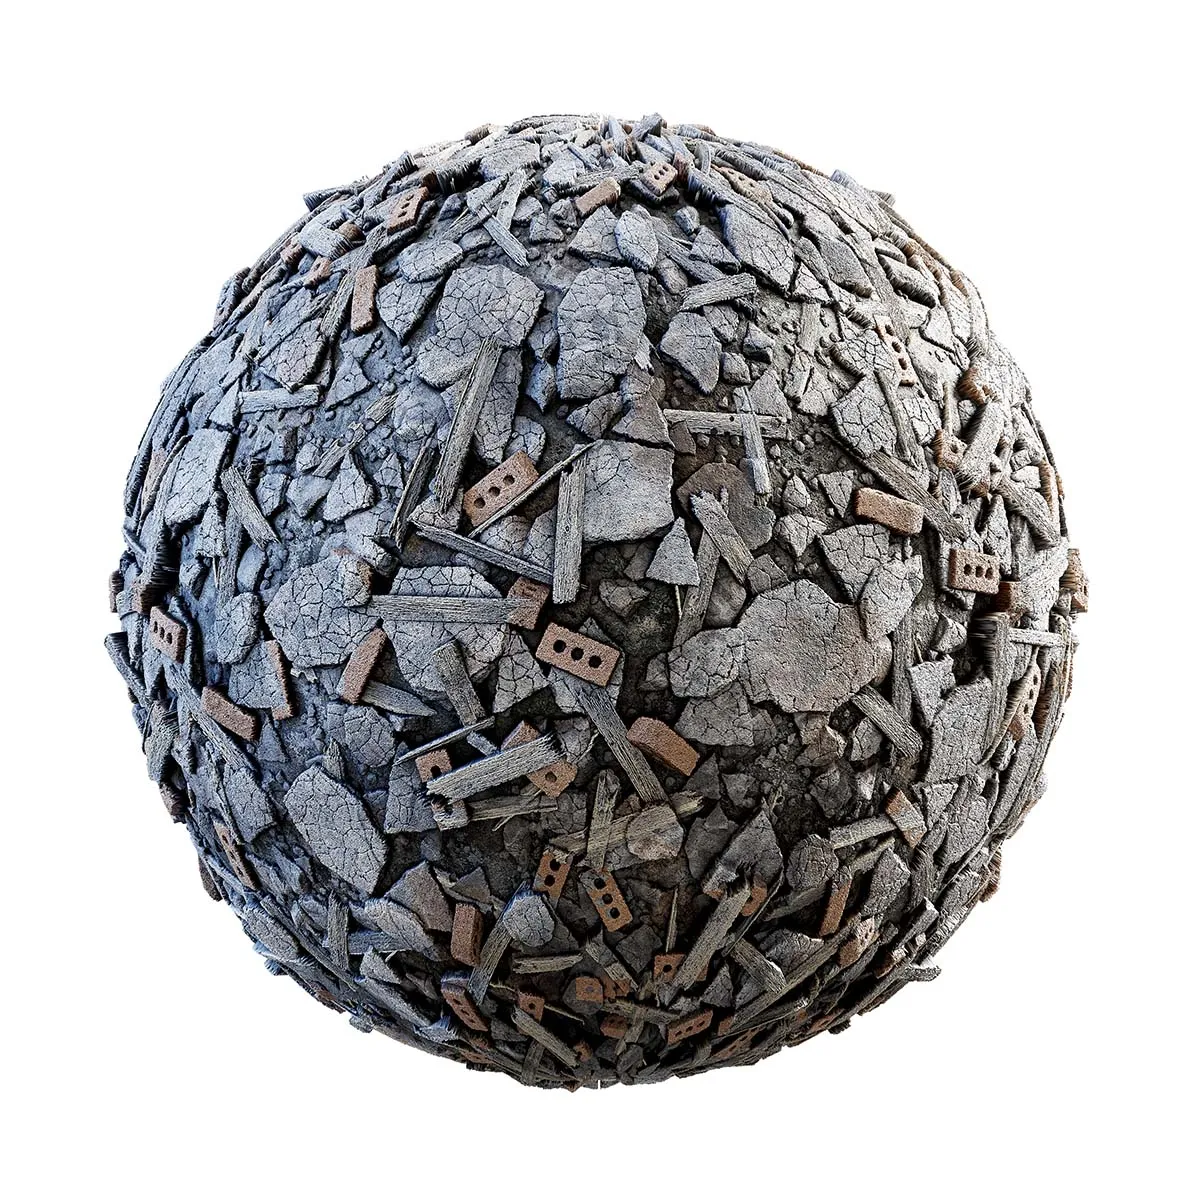 CGAxis PBR 28 – Concrete And Wood Rubble 31 23